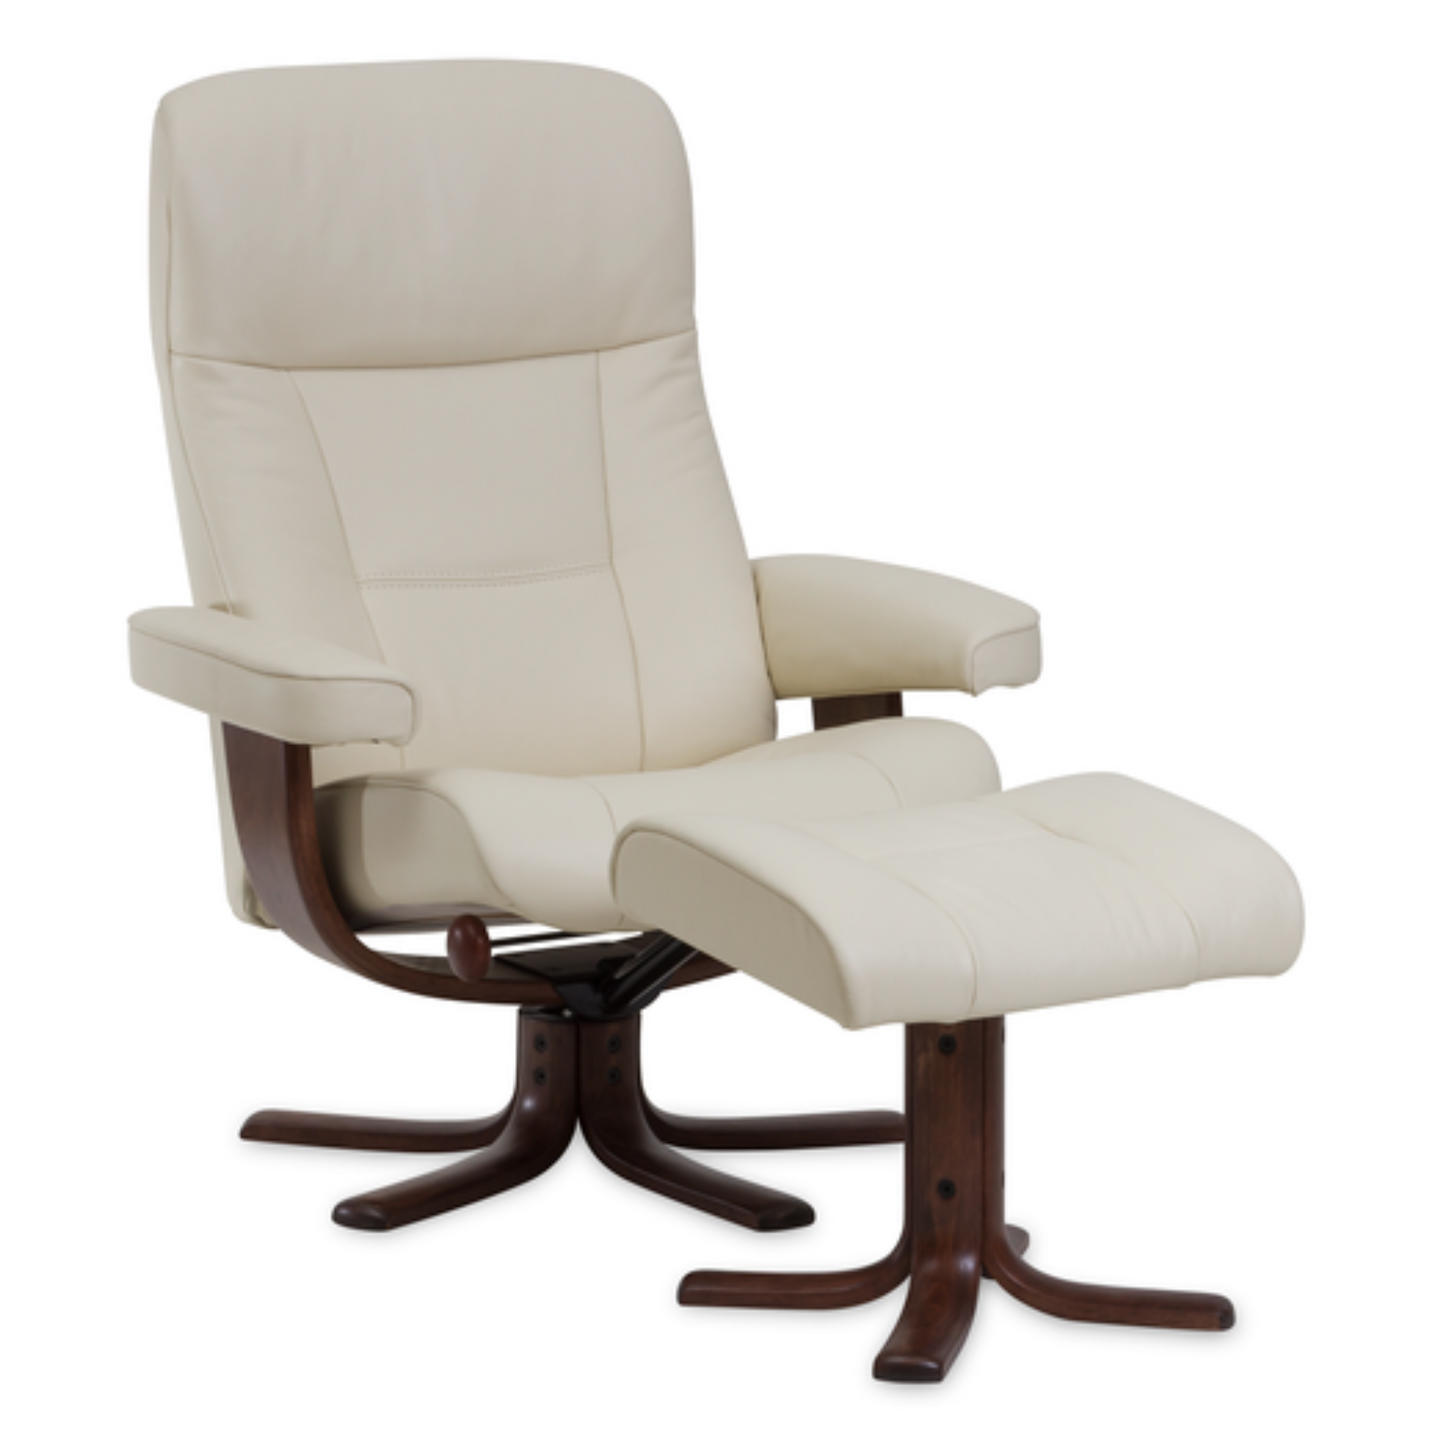 Nordic 11 Recliner Chair with Ottoman by IMG